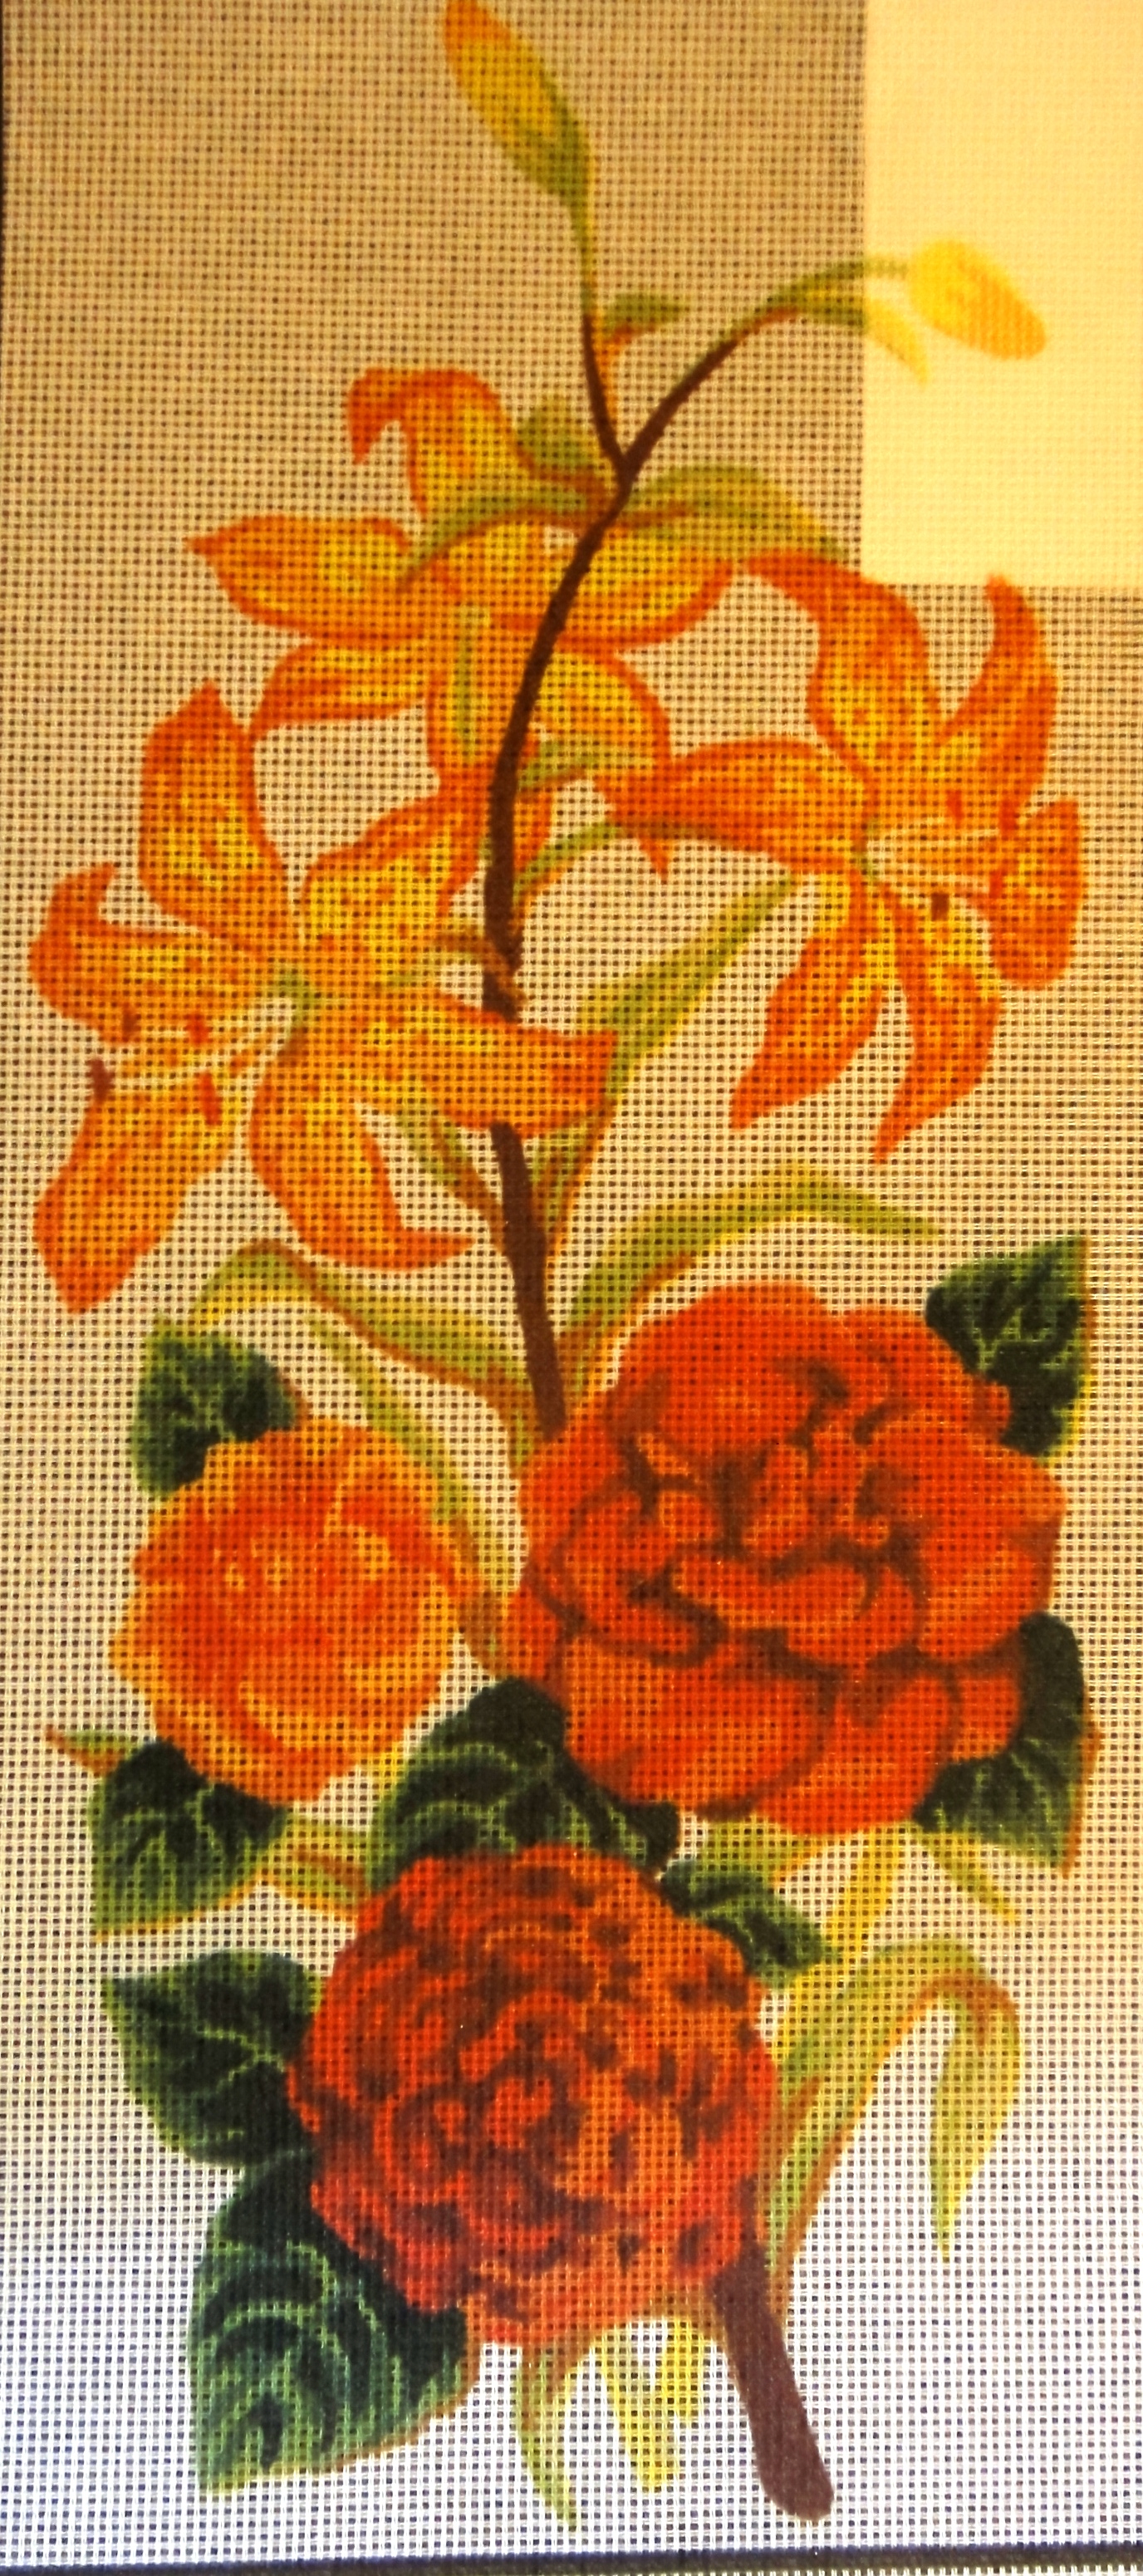 Flowers Printed Needlepoint Tapestry Canvas Collection D'art 8017